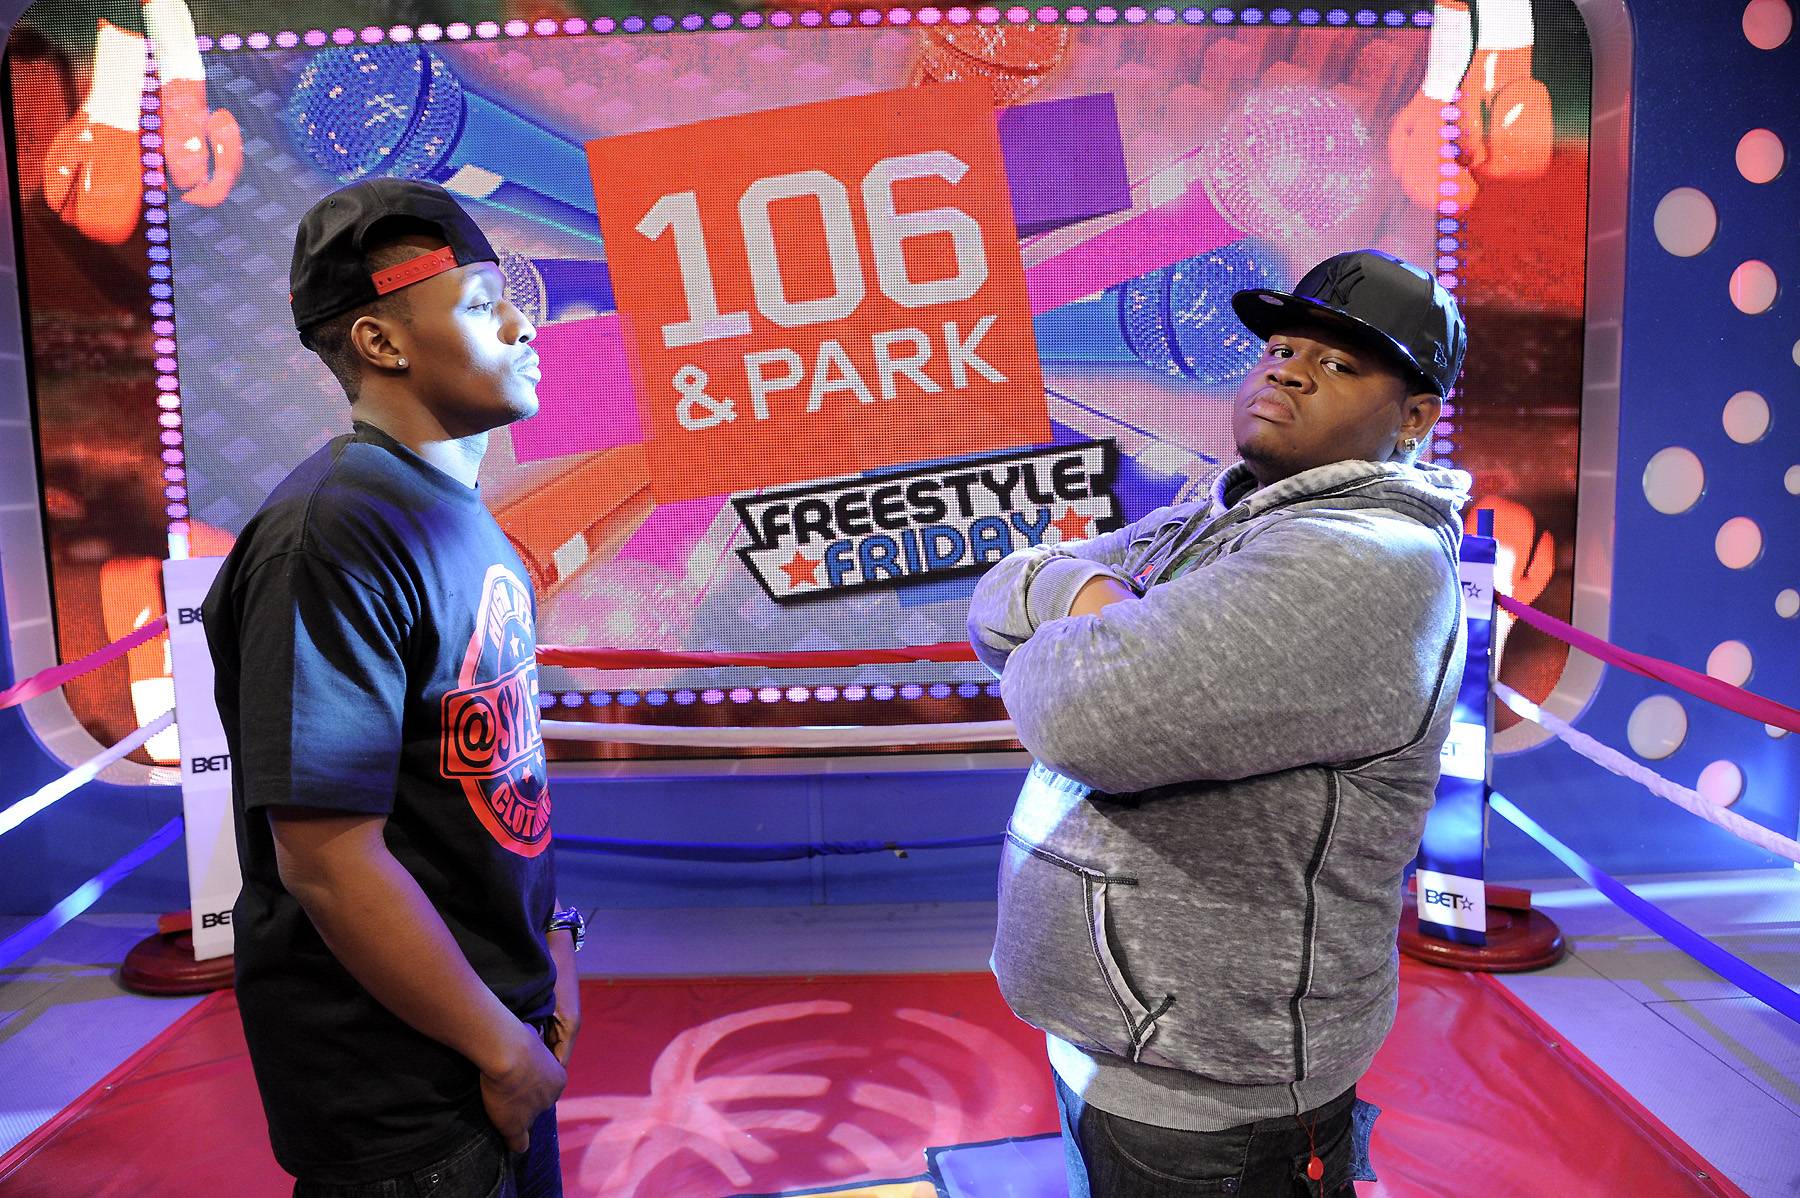 Battle Is On - Freestyle Friday contestants SyahBoy and Relly face off at 106 &amp; Park, April 6, 2012. (photo: John Ricard / BET)